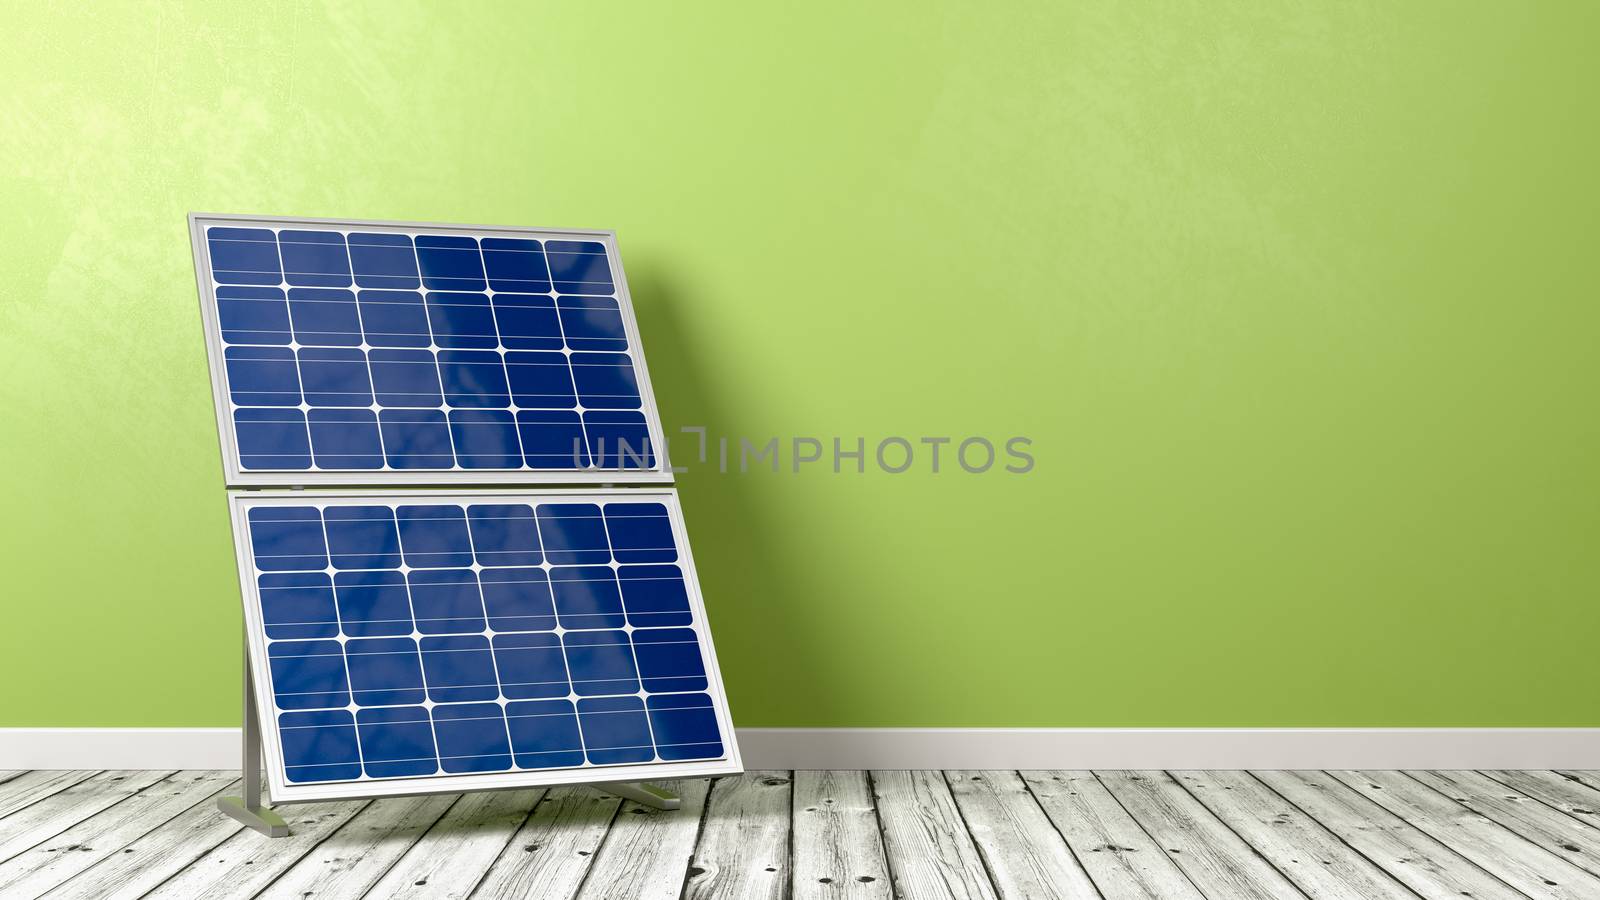 Solar Panel on Wooden Floor Against Green Wall with Copy Space 3D Illustration